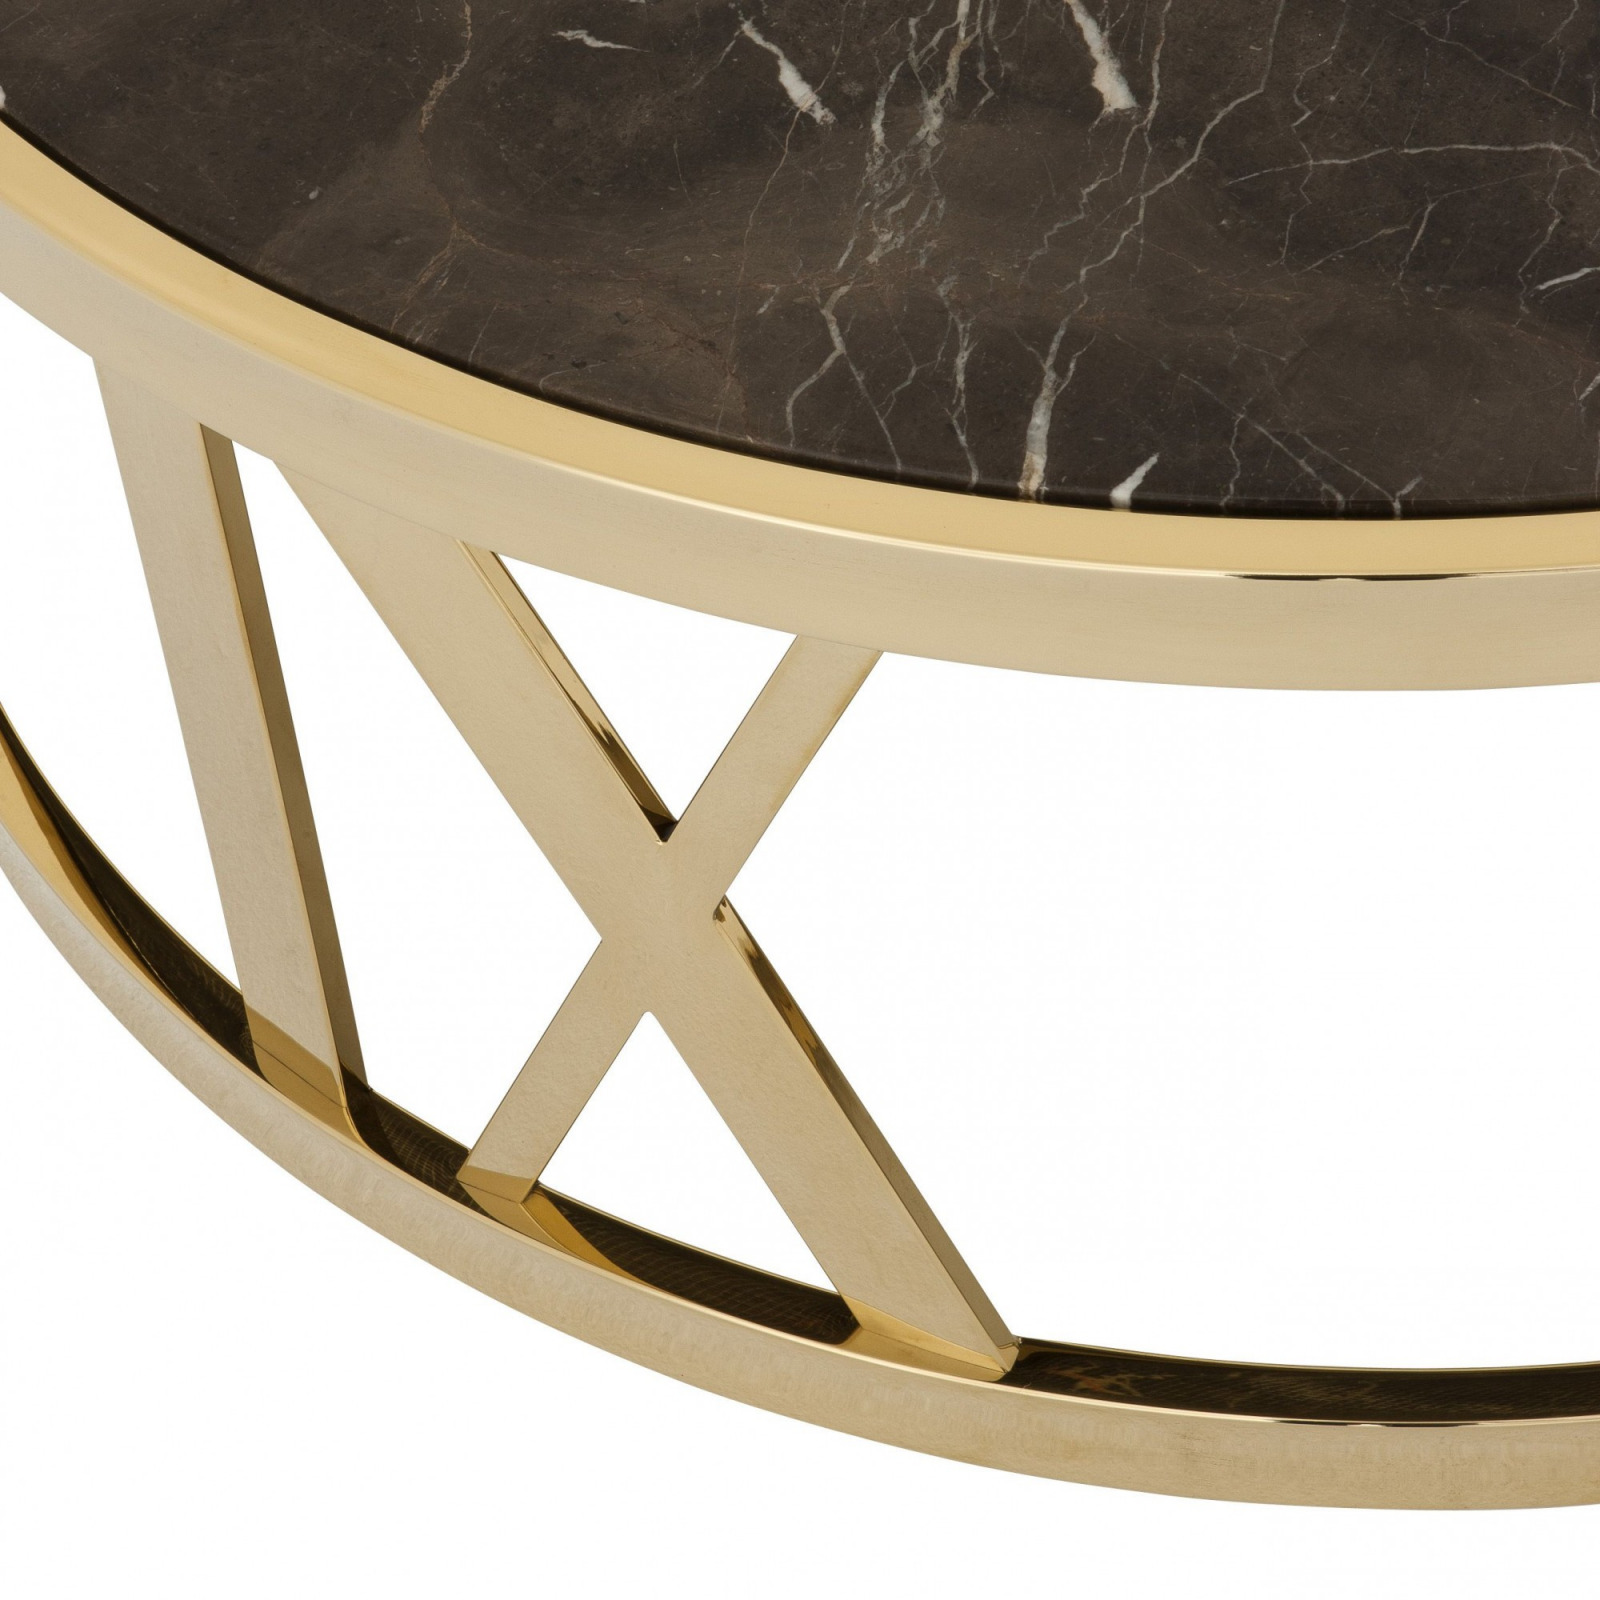 Baccarat side table